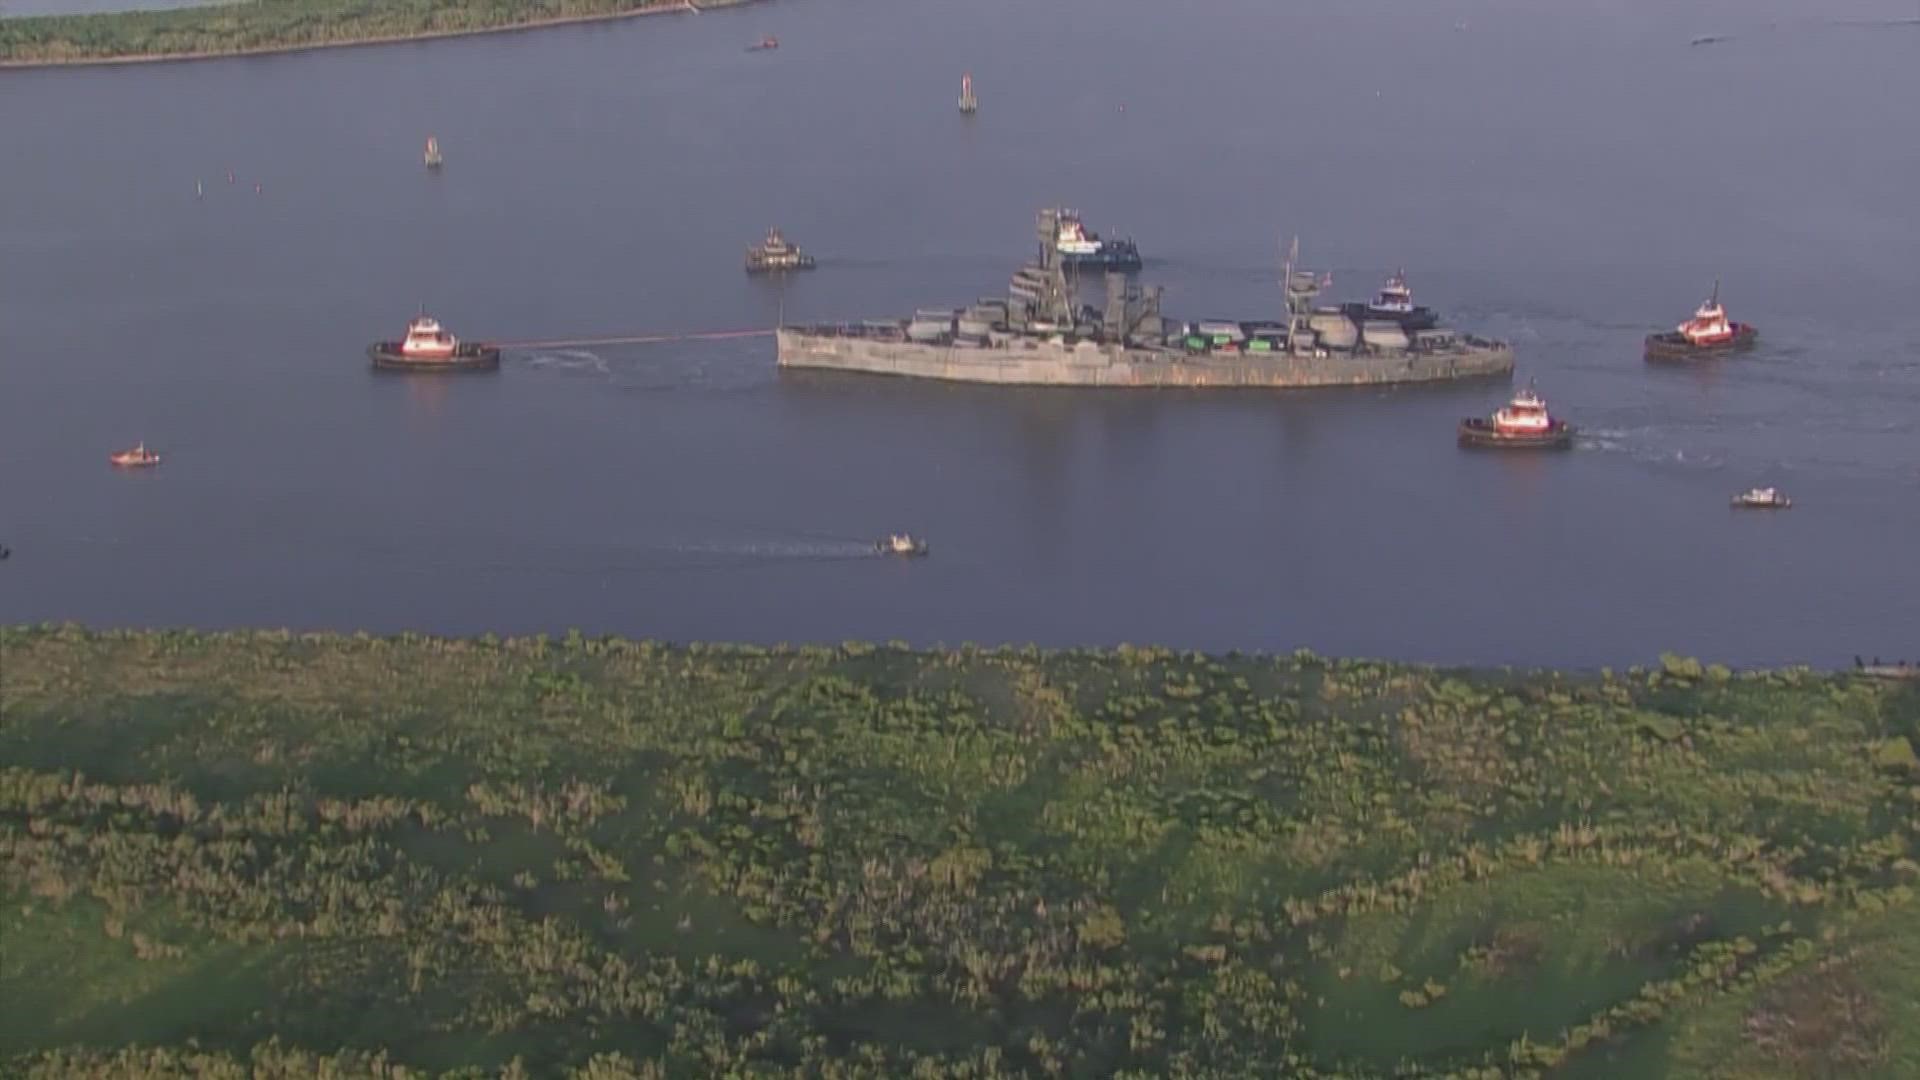 The Battleship Texas is moving to Galveston for repairs. It's the last remaining battleship that served in both World Wars.